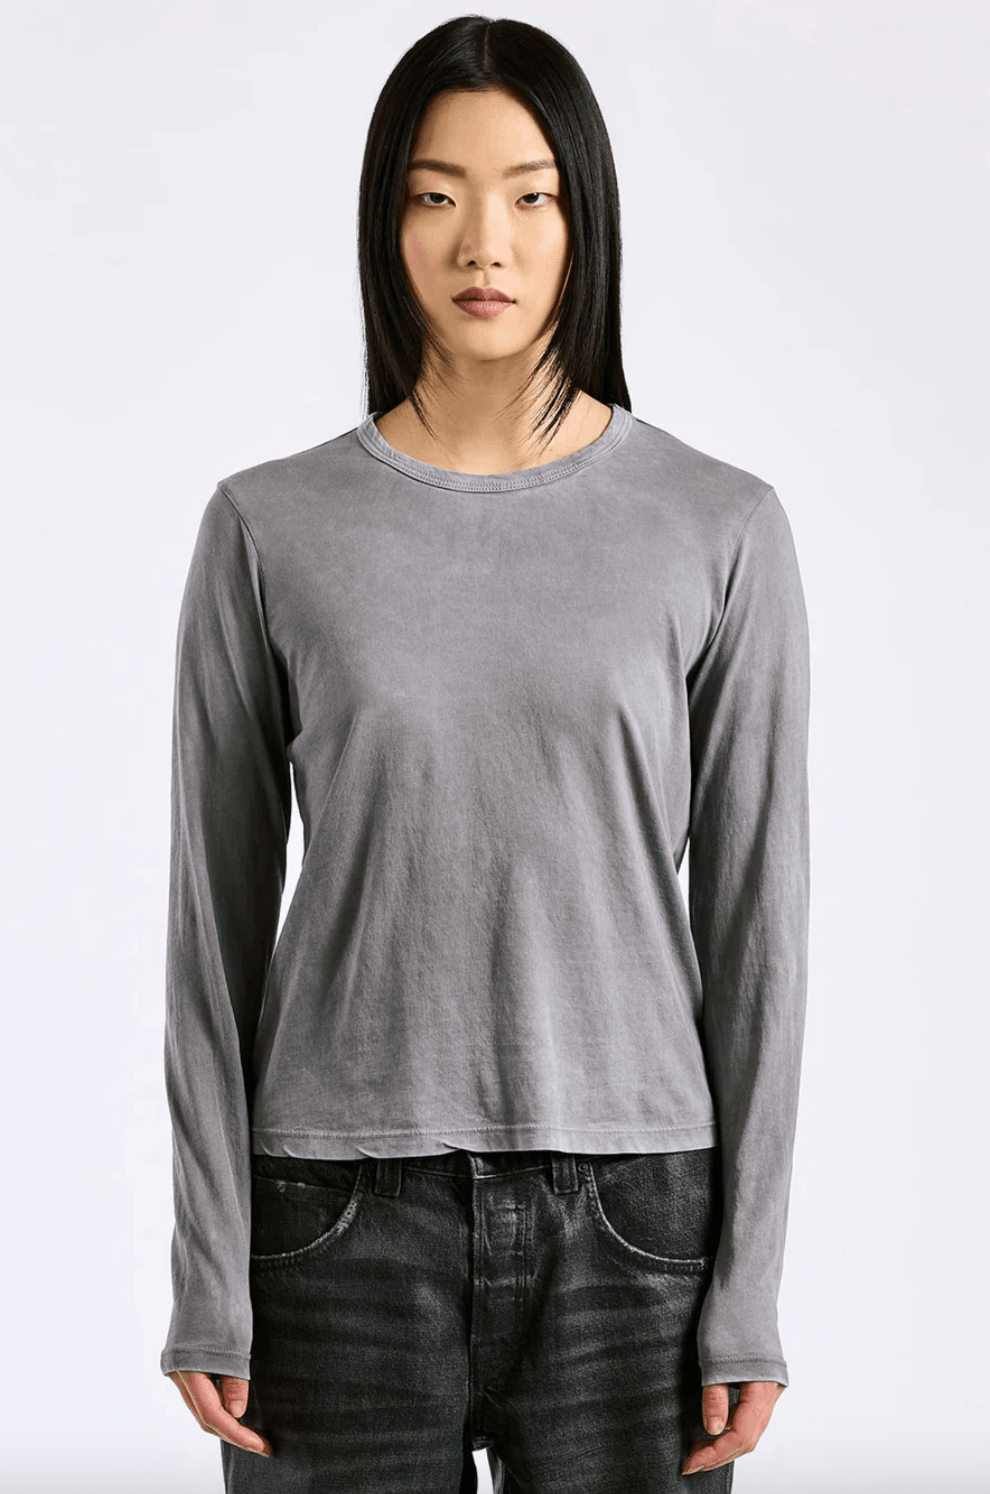 Standard Long Sleeve Tee by Cotton Citizen - Haven